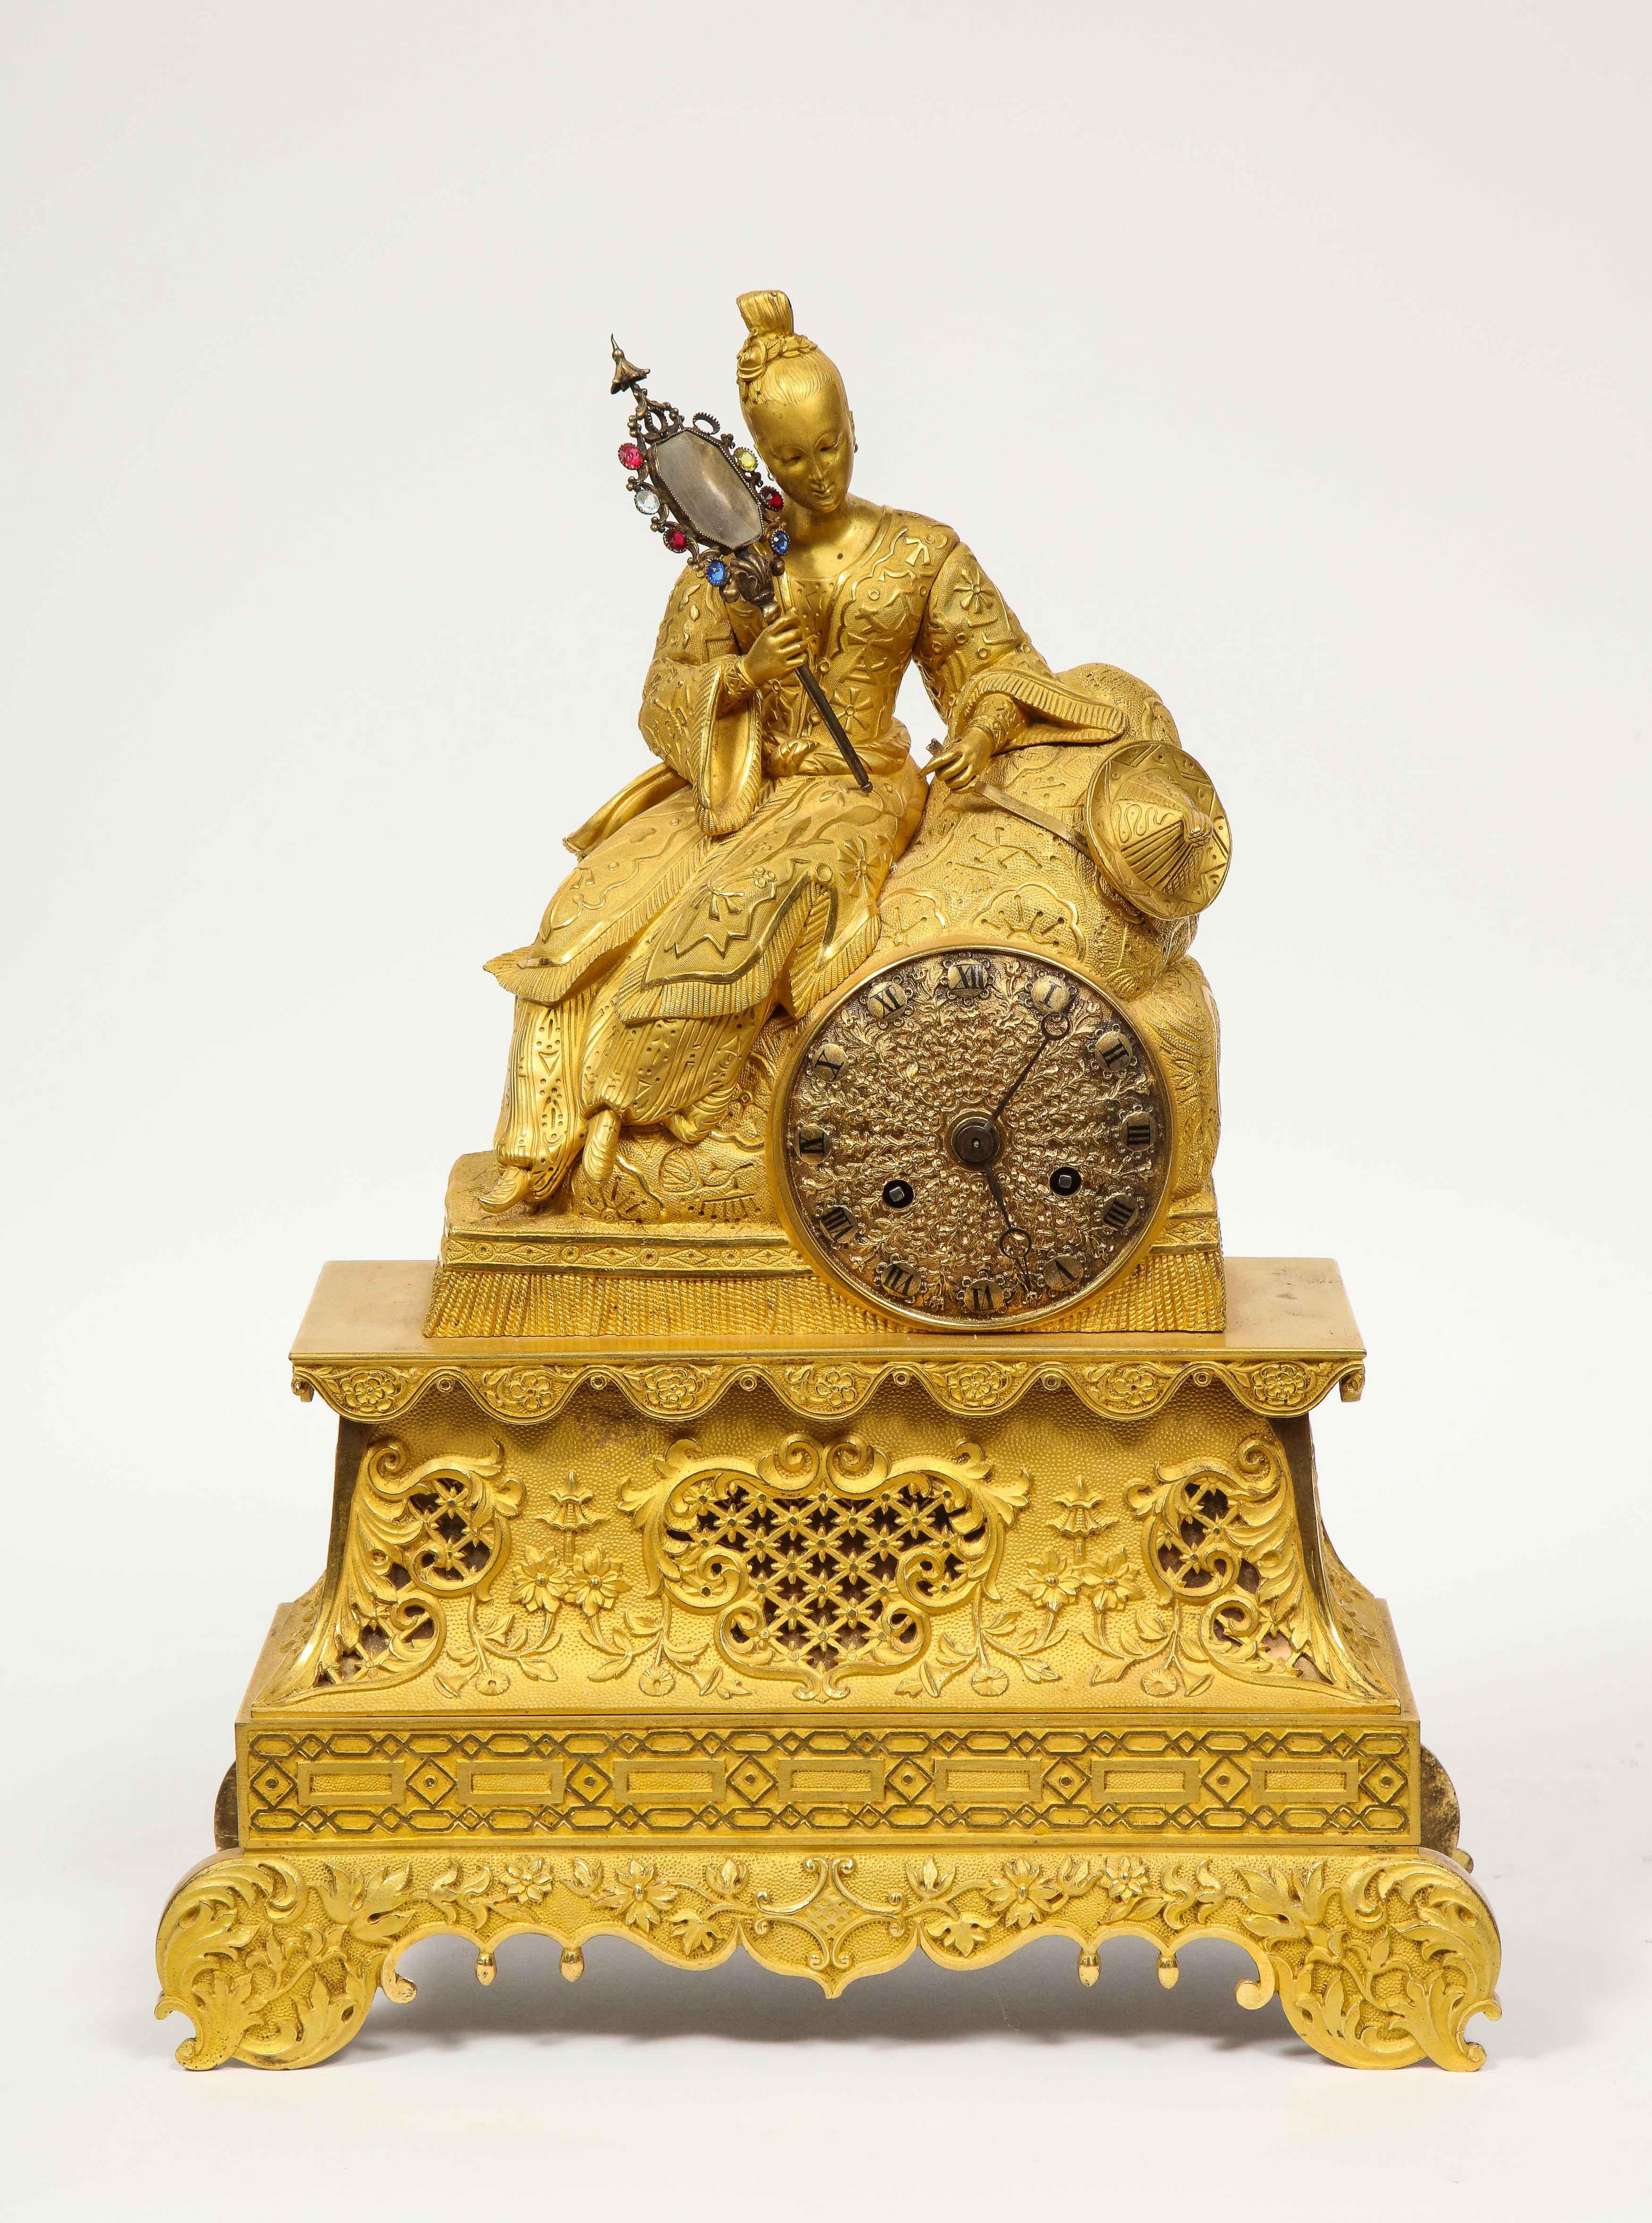 Exquisite French Charles X-Ormolu and jeweled bronze chinoiserie figural table clock, early 19th century.

Depicting a seated Chinese woman holding a jeweled mirror in one hand and her hat in another hand, dressed in her elaborate garments,. The